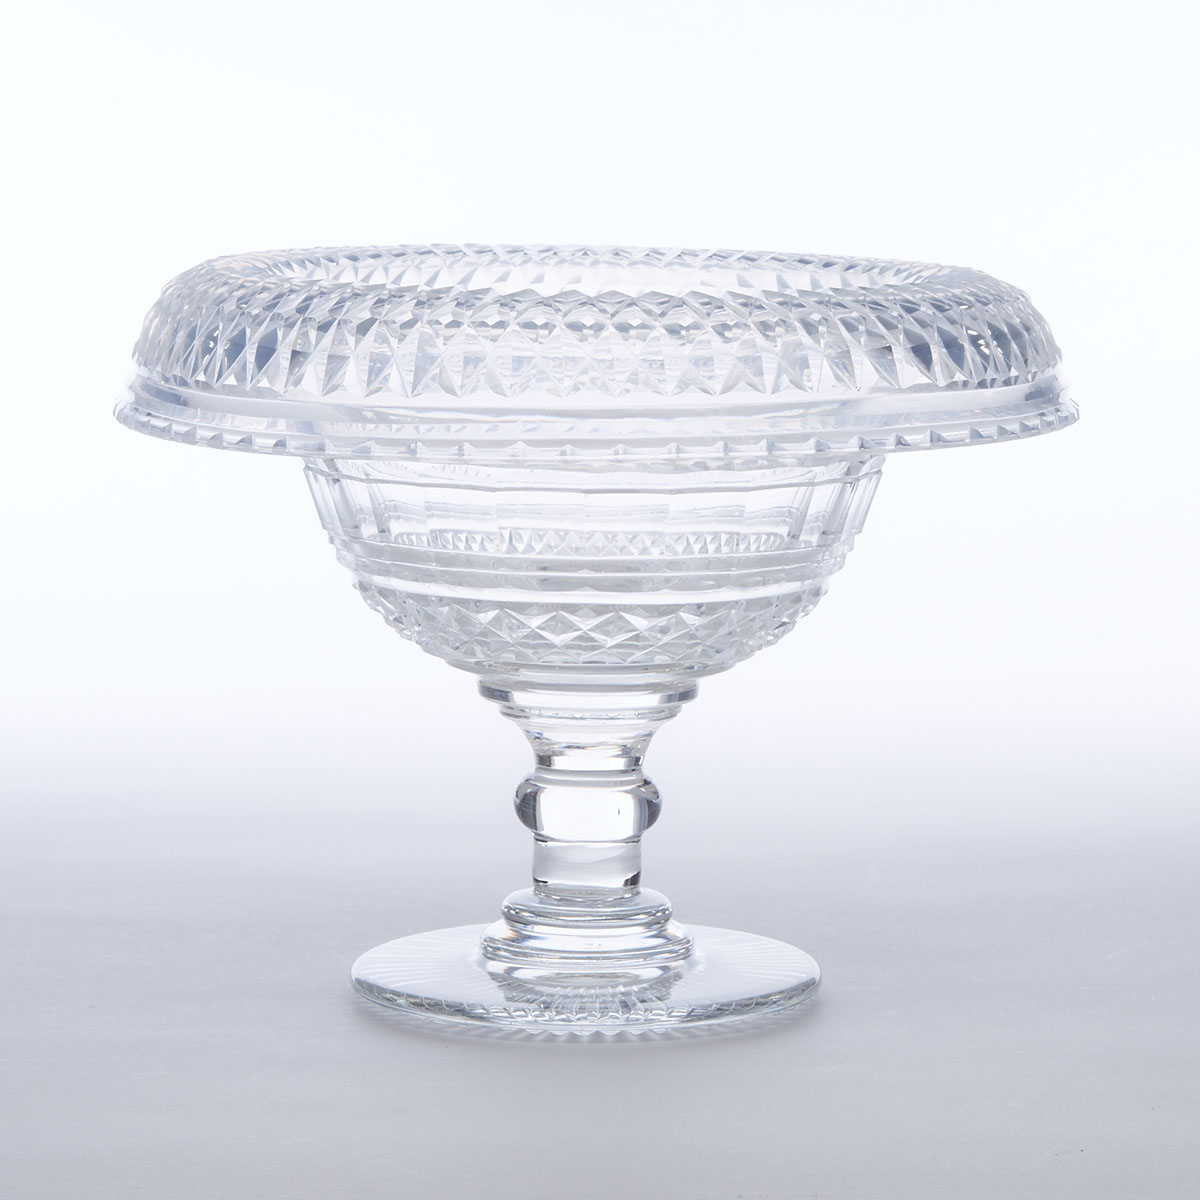 English Cut Glass Pedestal Footed Bowl, 19th century